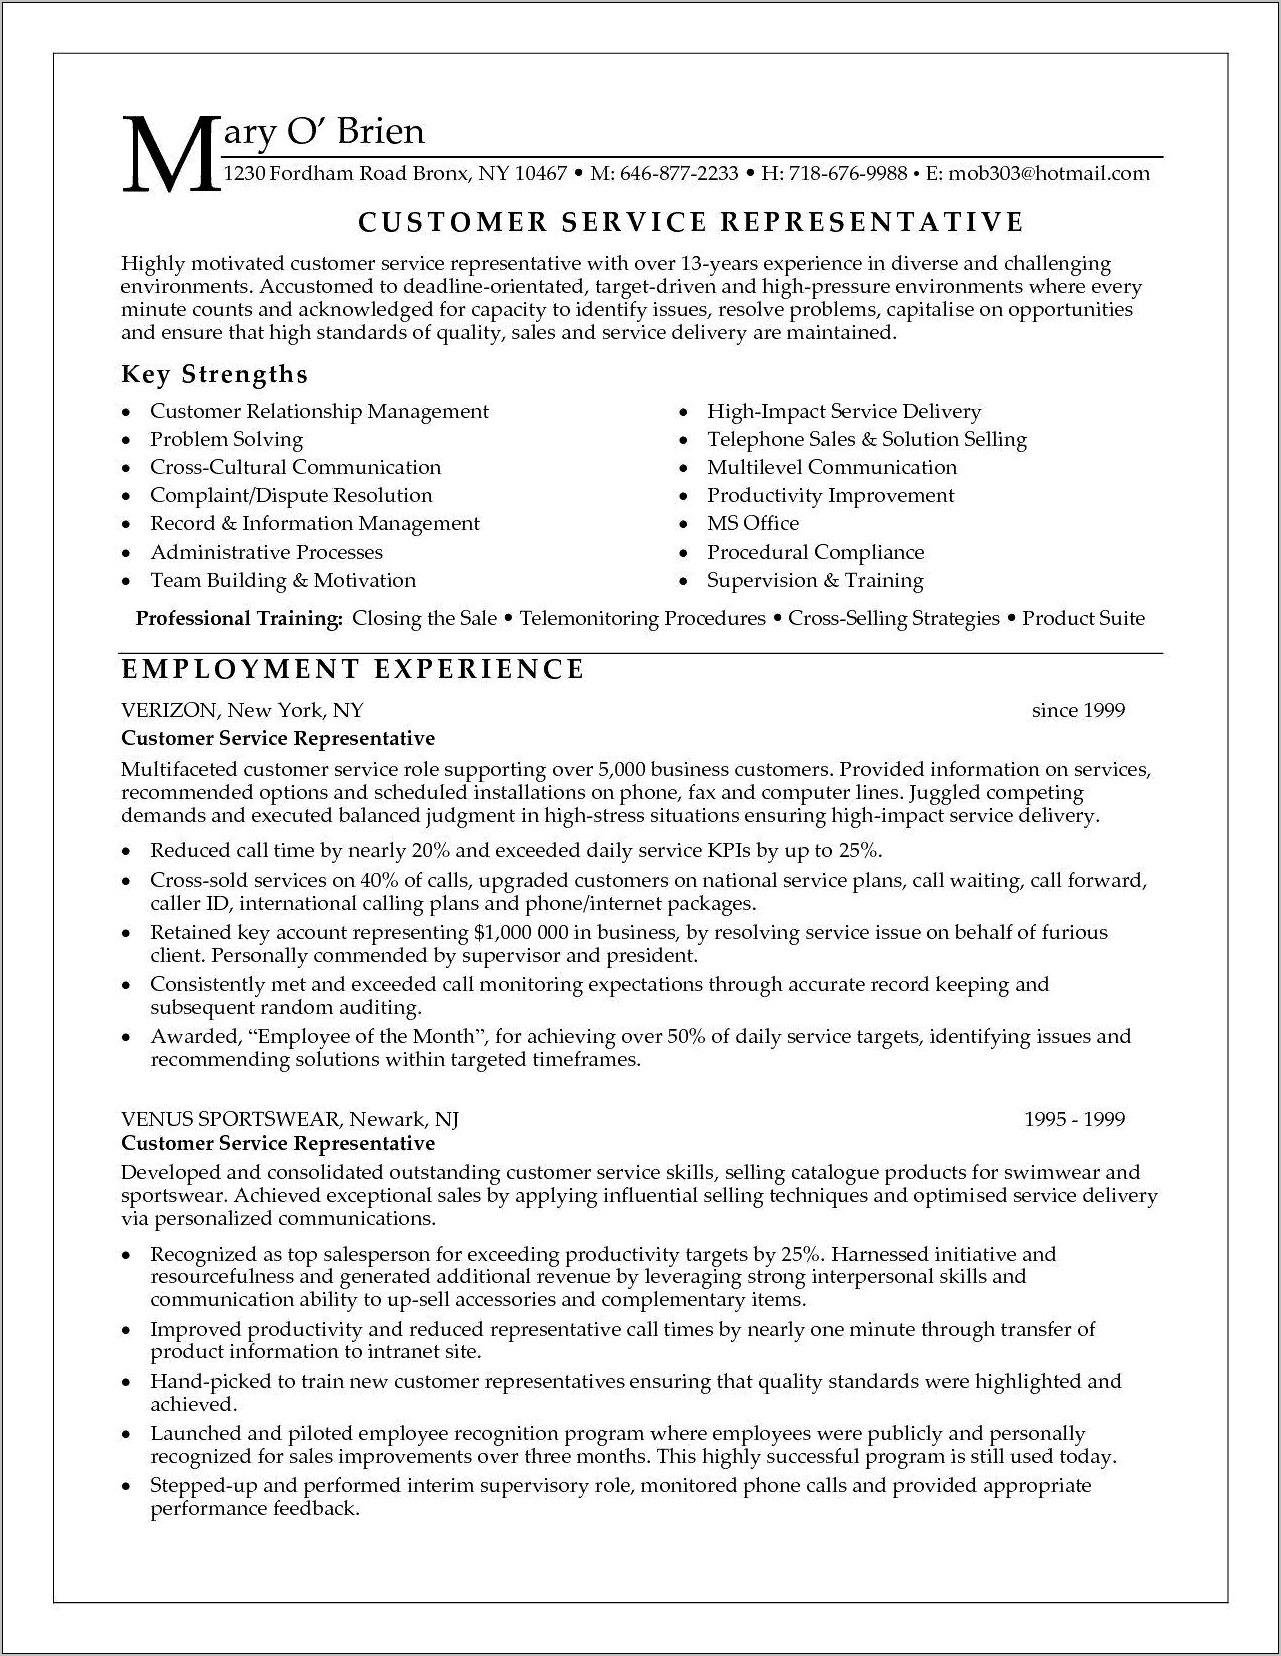 Call Center Rep Resume Objective